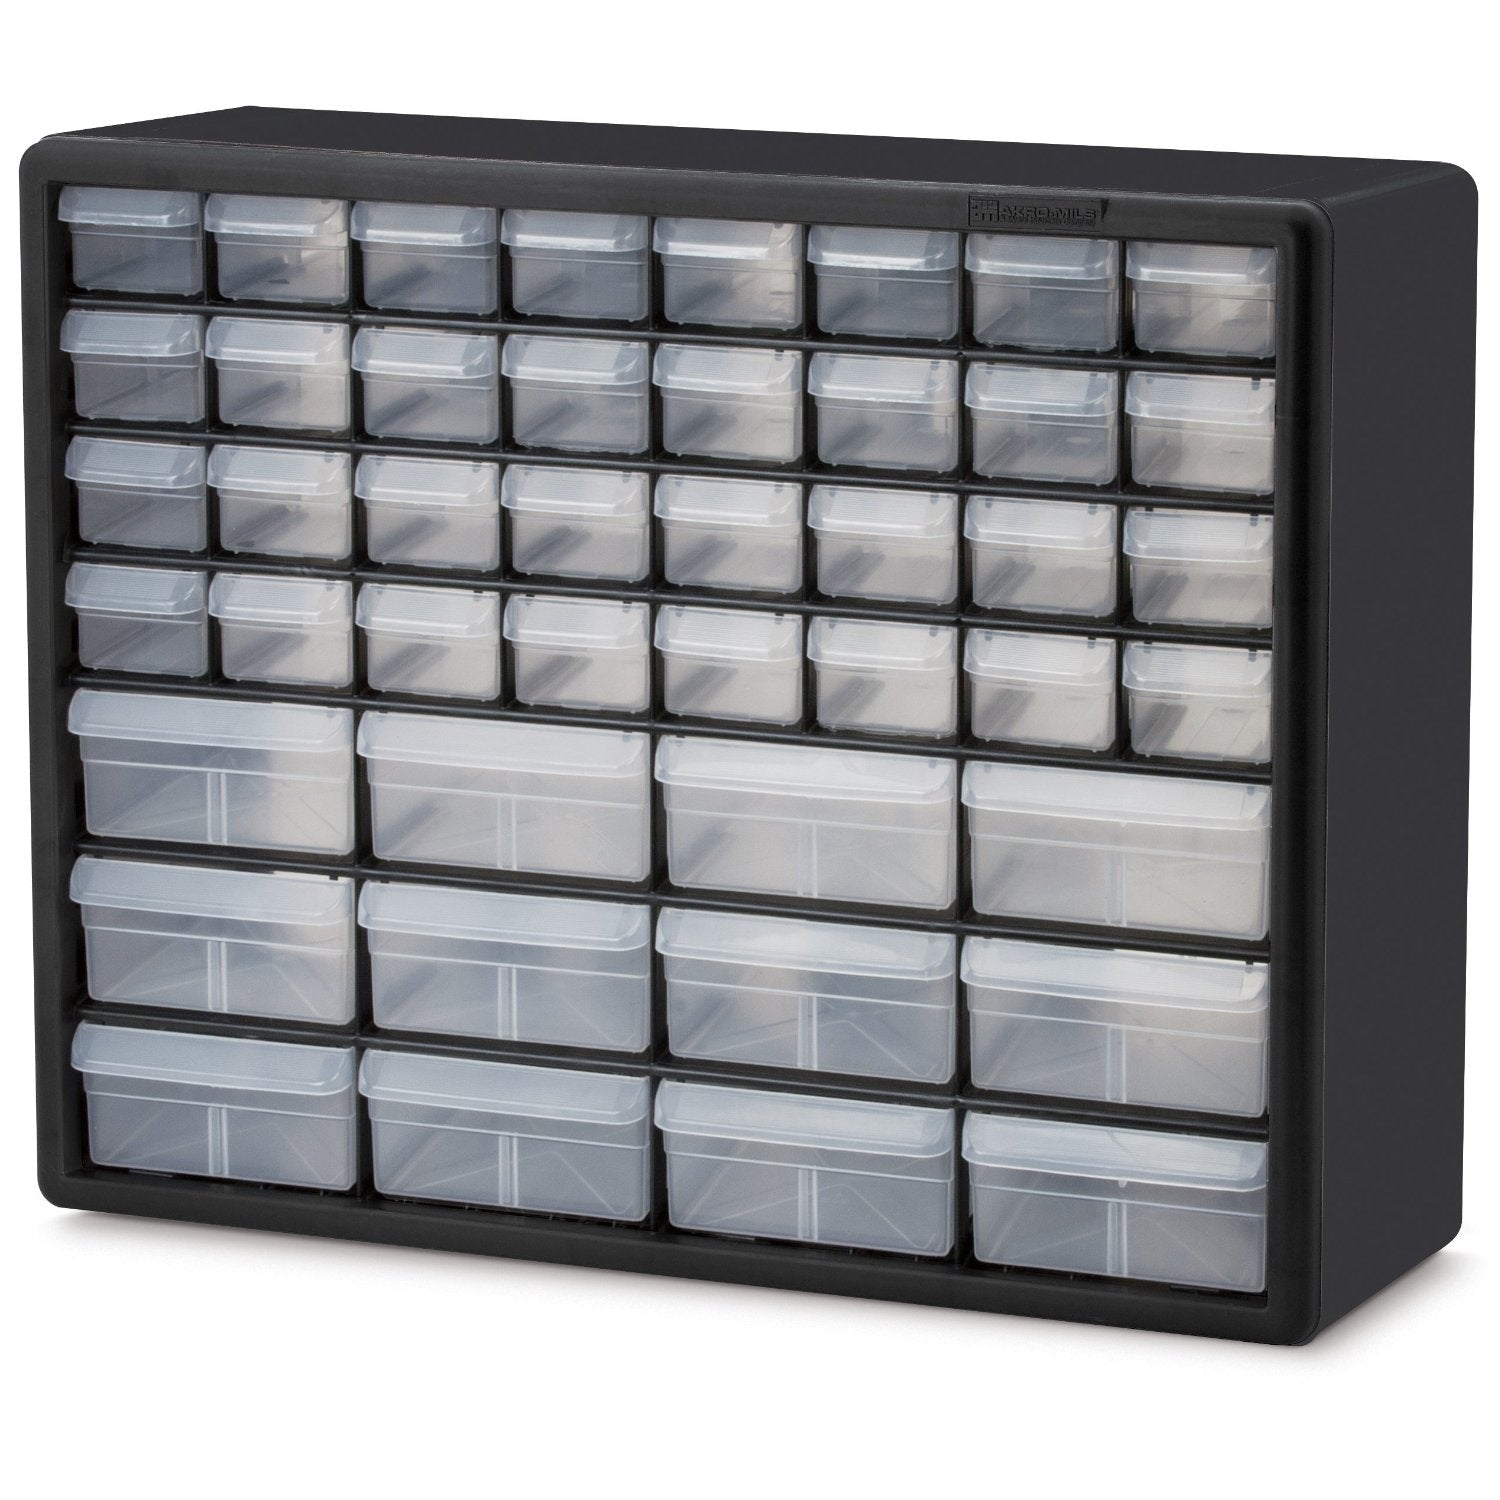 Accents > Storage Cabinets - Hardware Craft Fishing Garage Storage Cabinet In Black With Drawers